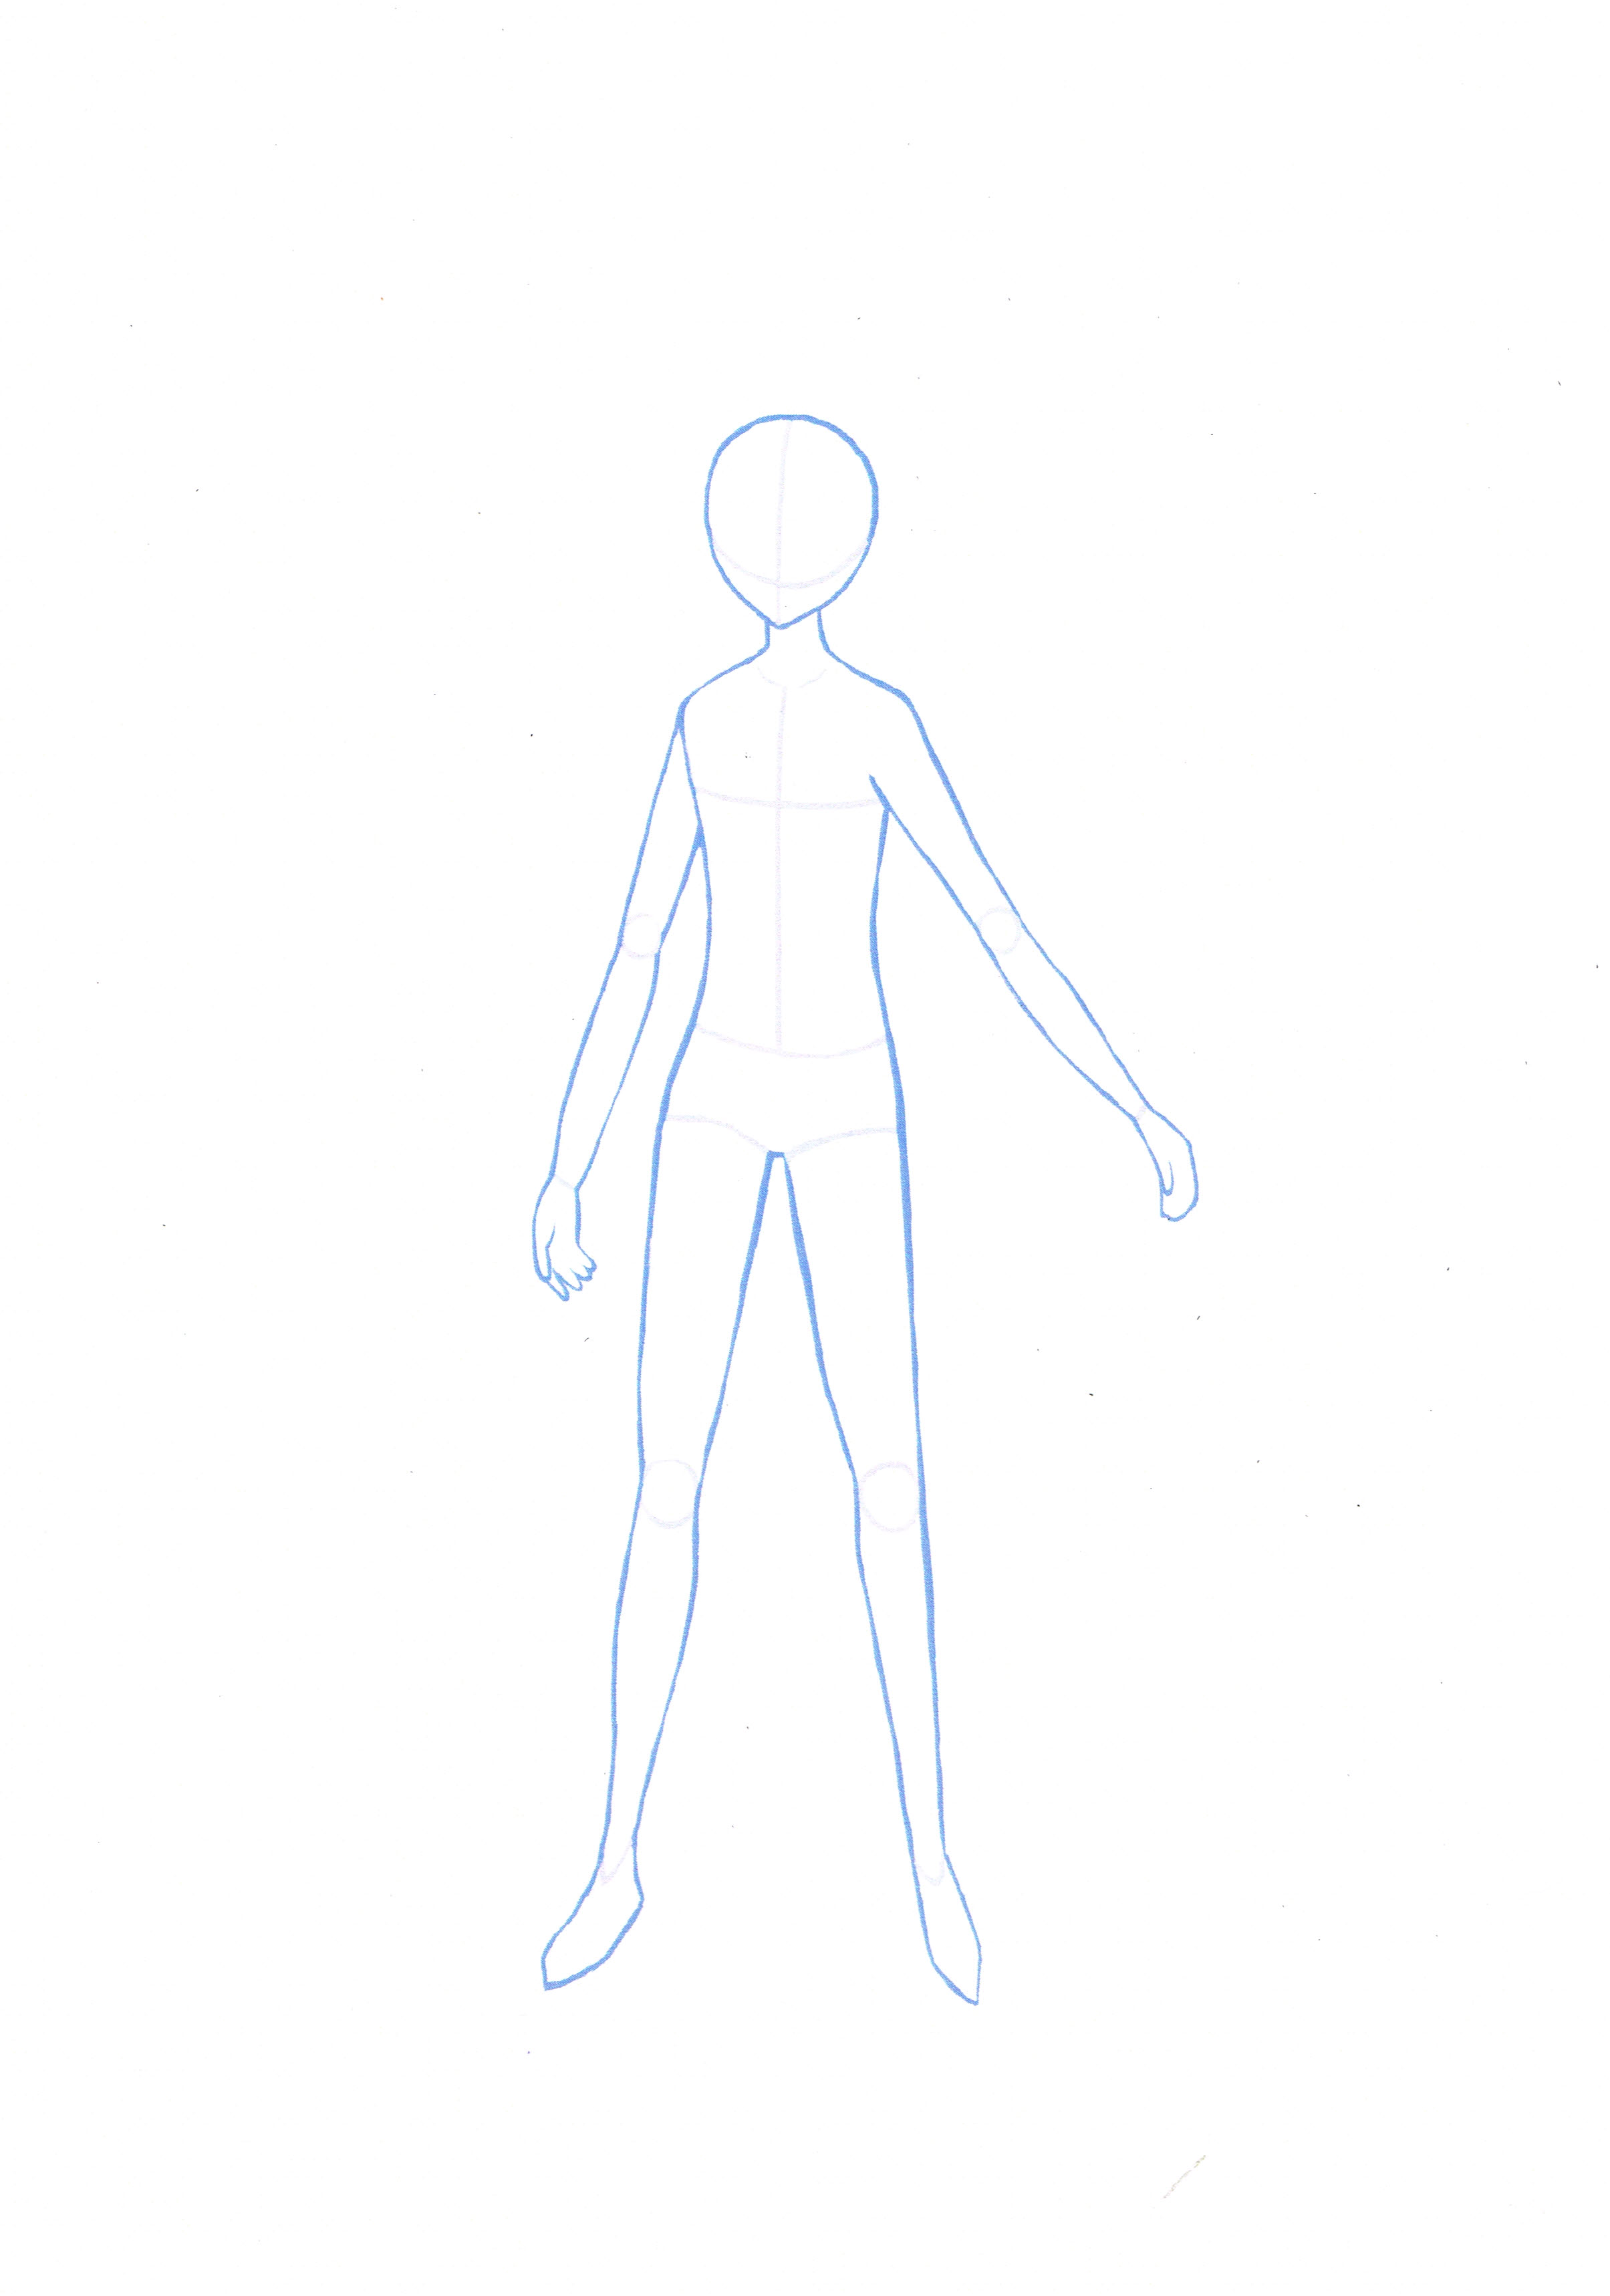 I was using this template to base my character design #74583149